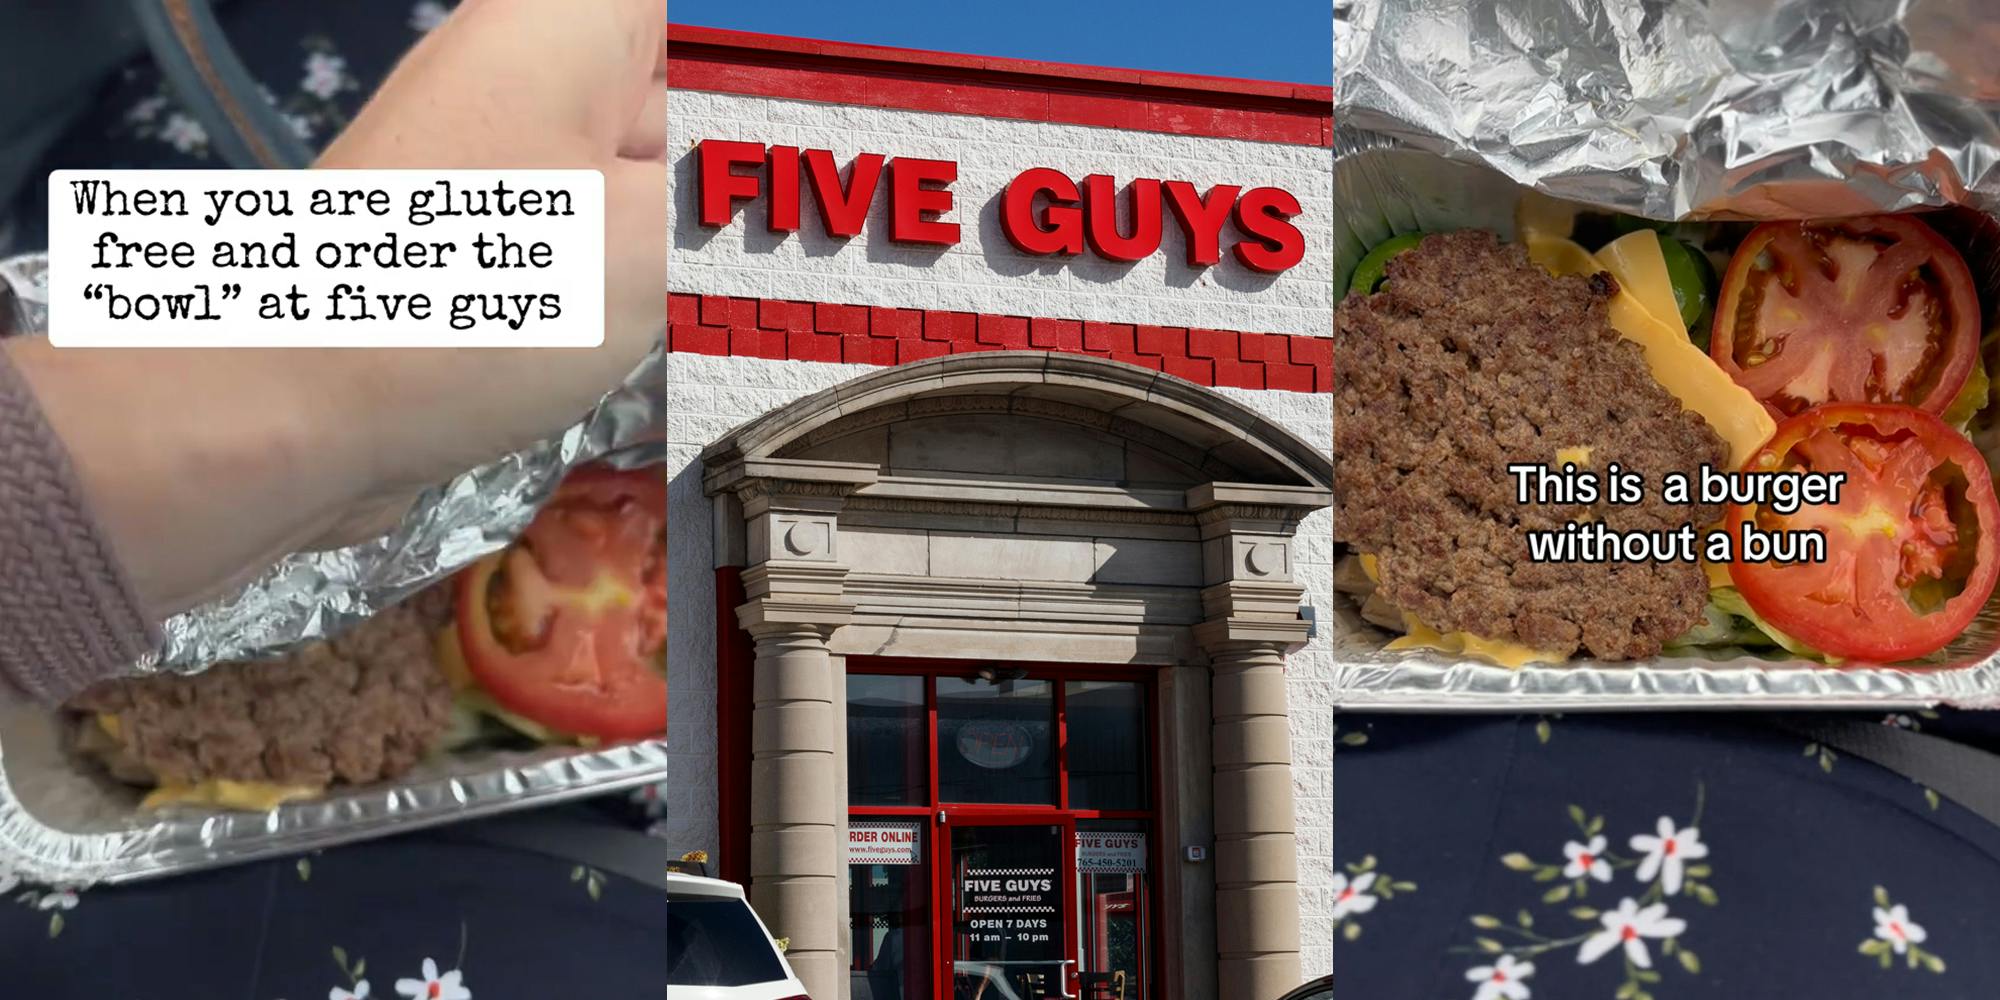 Five Guys customer opening food in aluminum foil container with caption "When you are gluten free and order the "bowl" at five guys" (l) Five Guys building with sign (c) Five Guys burger bowl with caption "This is a burger without a bun" (r)